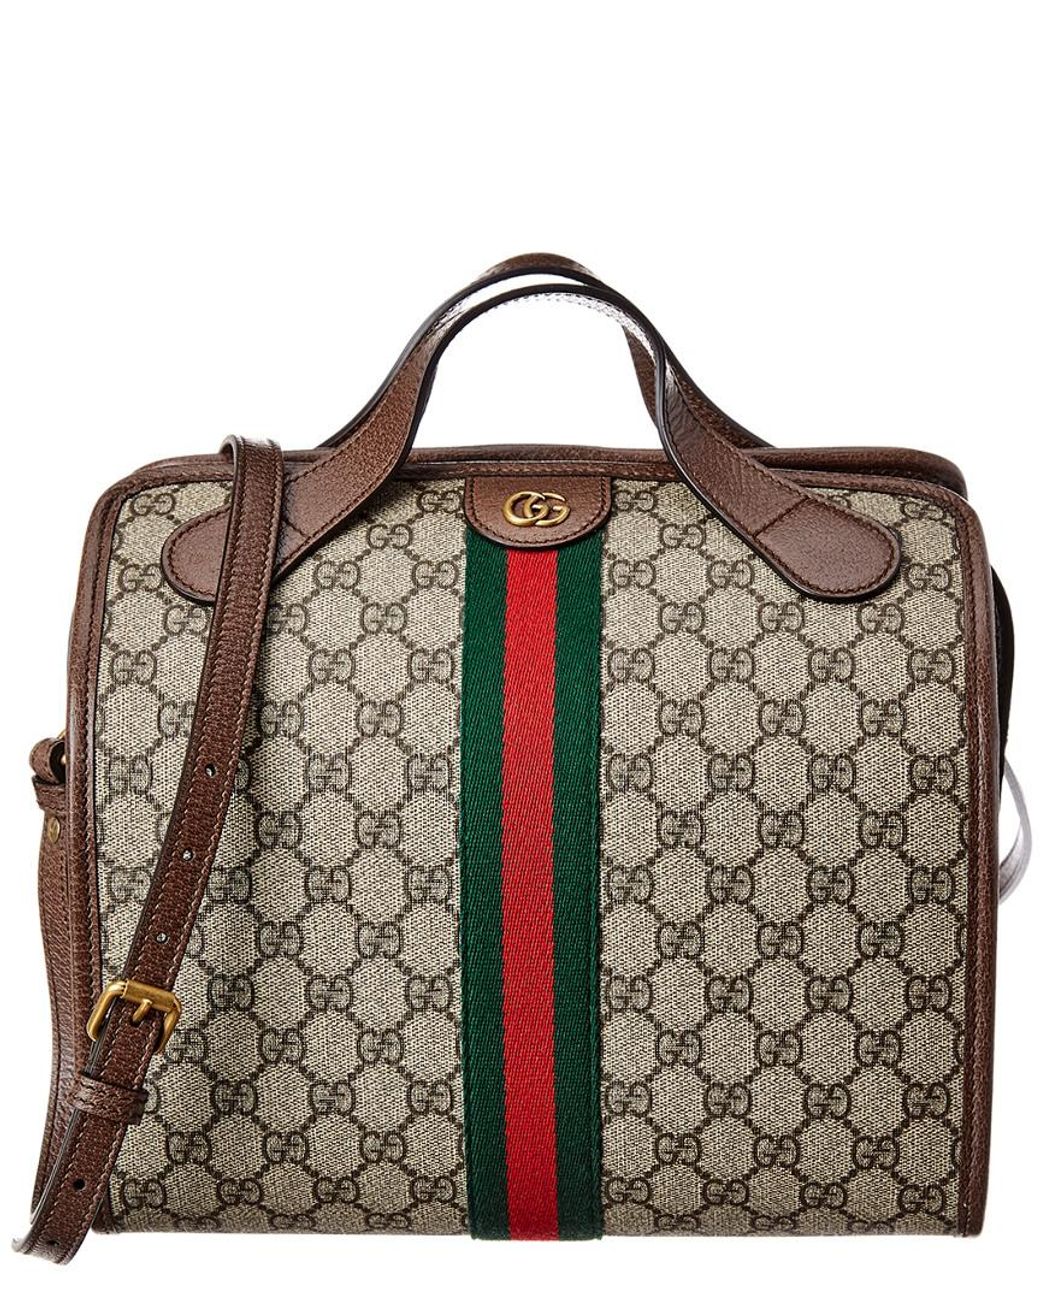 Gucci Ophidia GG Supreme Canvas & Leather Mini Duffle in Brown - Lyst